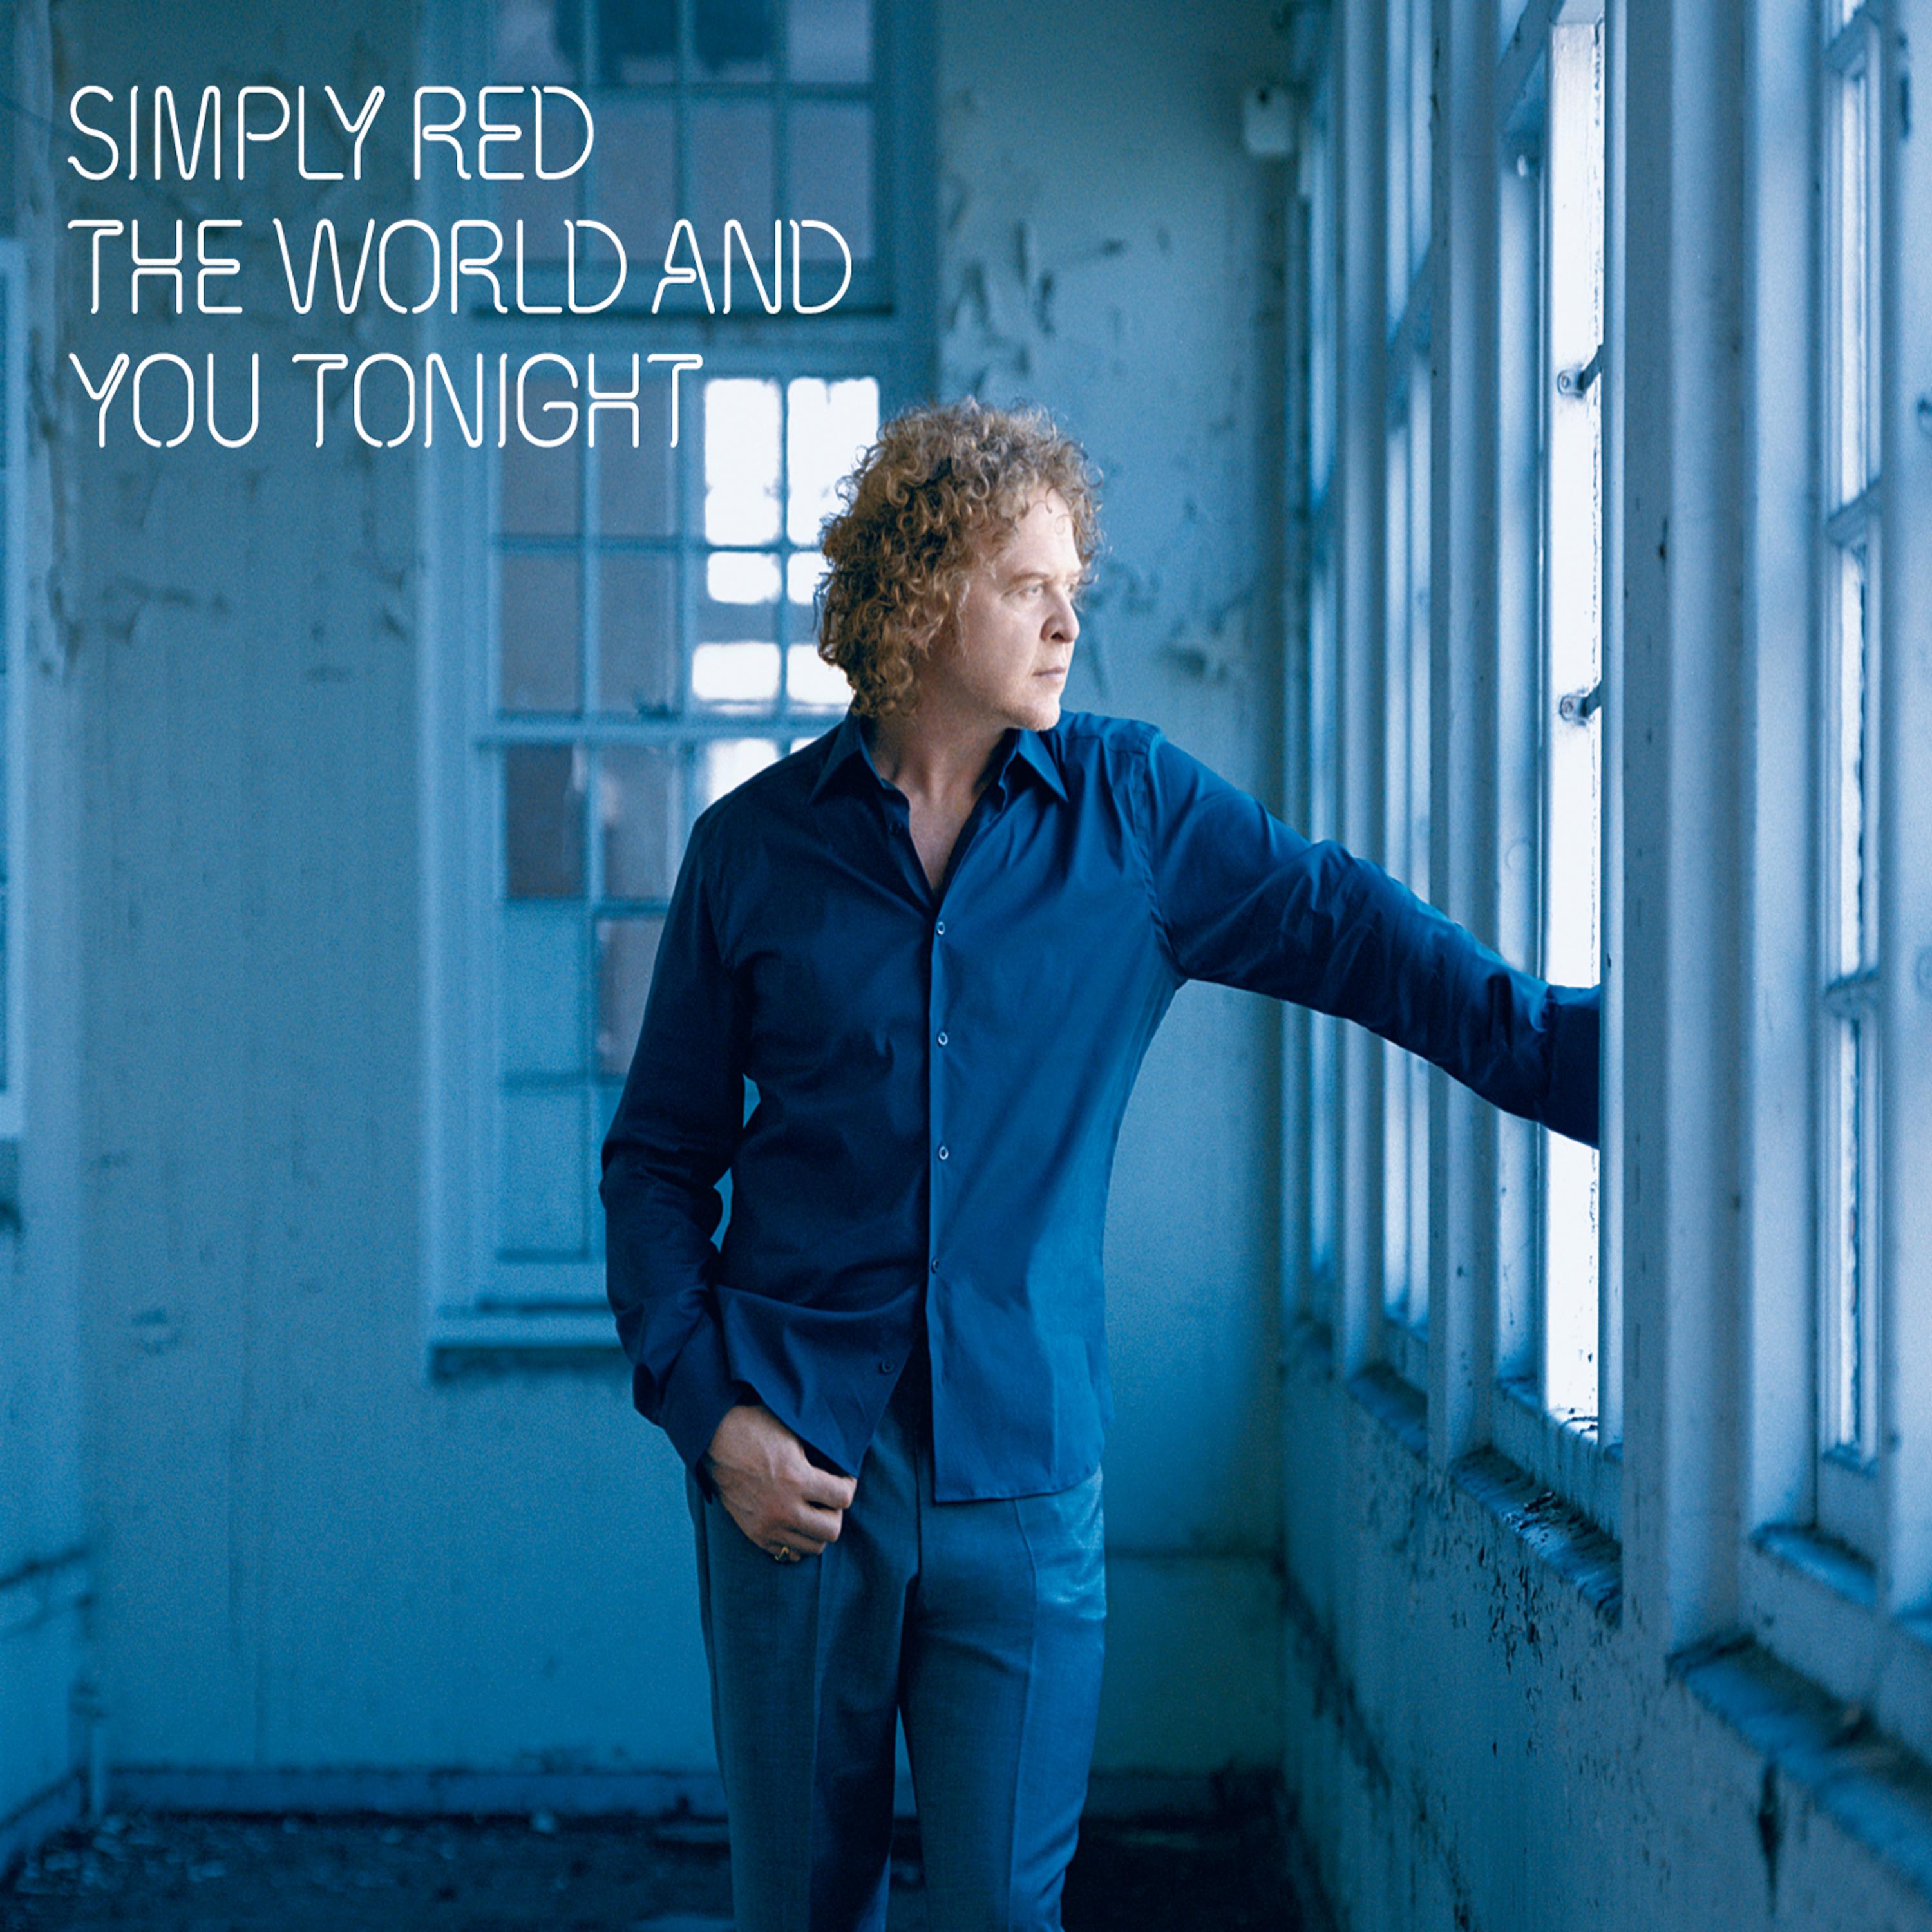 Red текст песен. Группа simply Red. Simply Red в молодости. Simply Red 2003. The Greatest Hits simply Red.